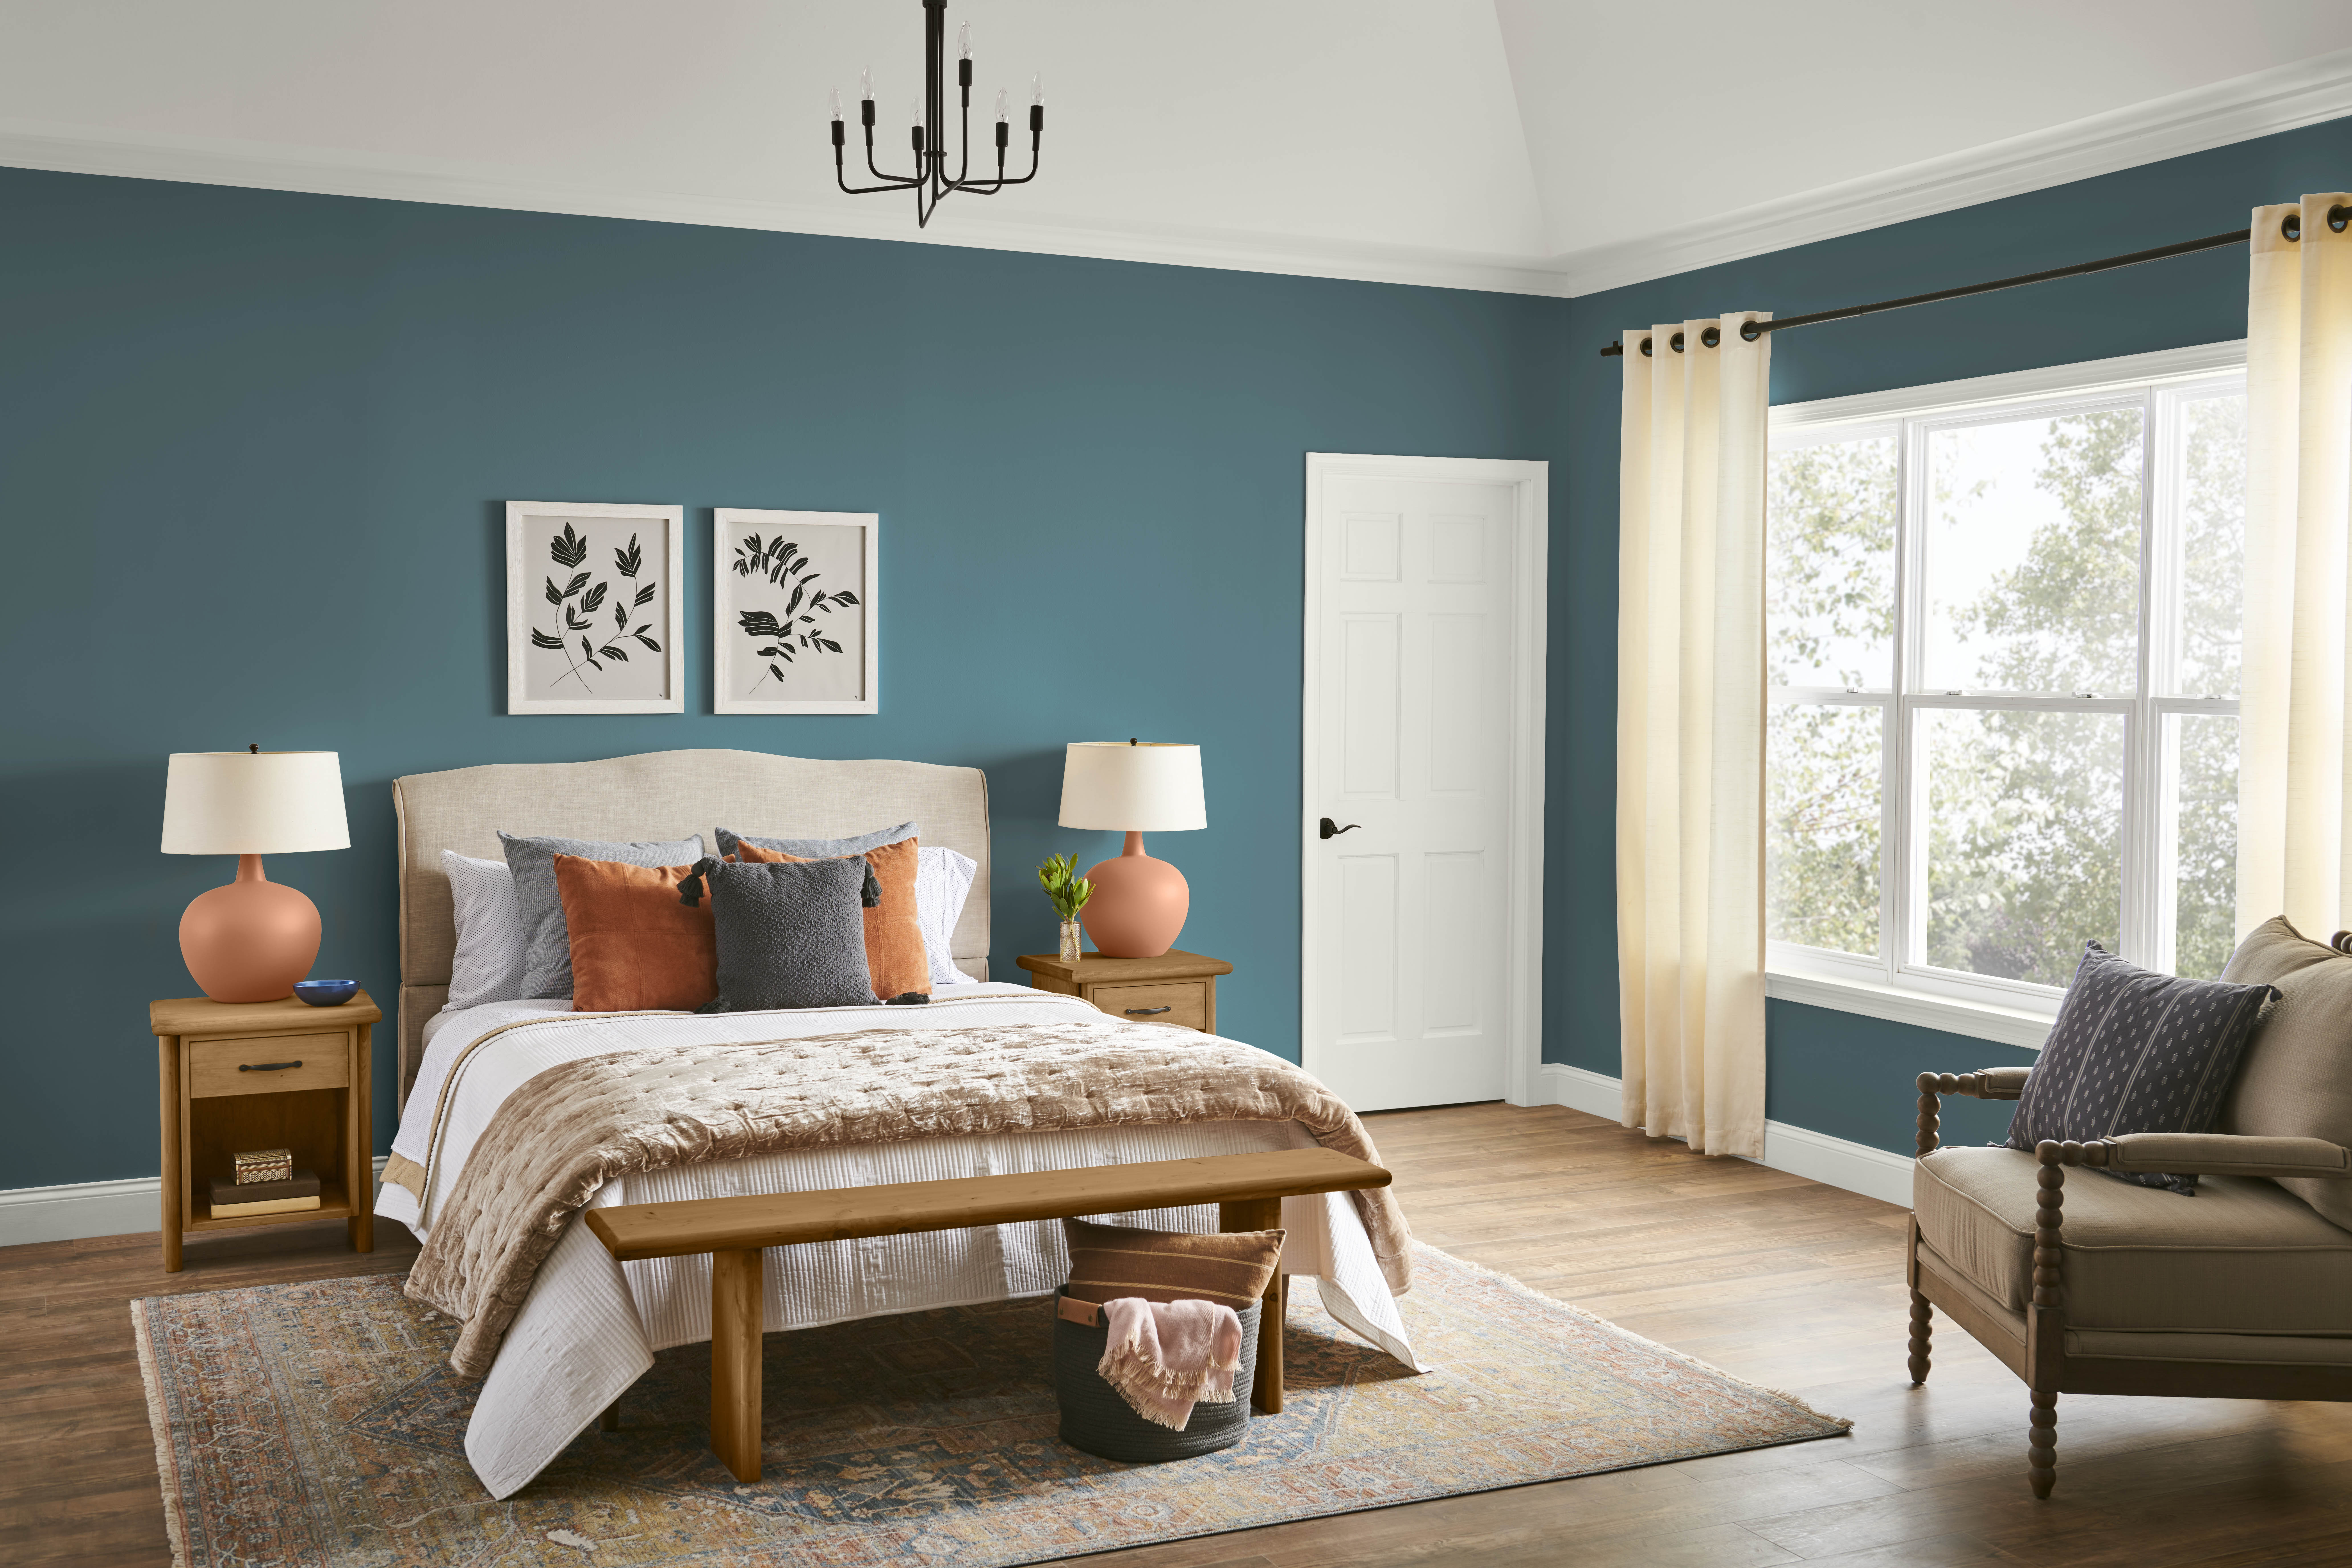 A bedroom with walls in the colour Sophisticated Teal, styled with neutral and terra cotta furniture and accents 